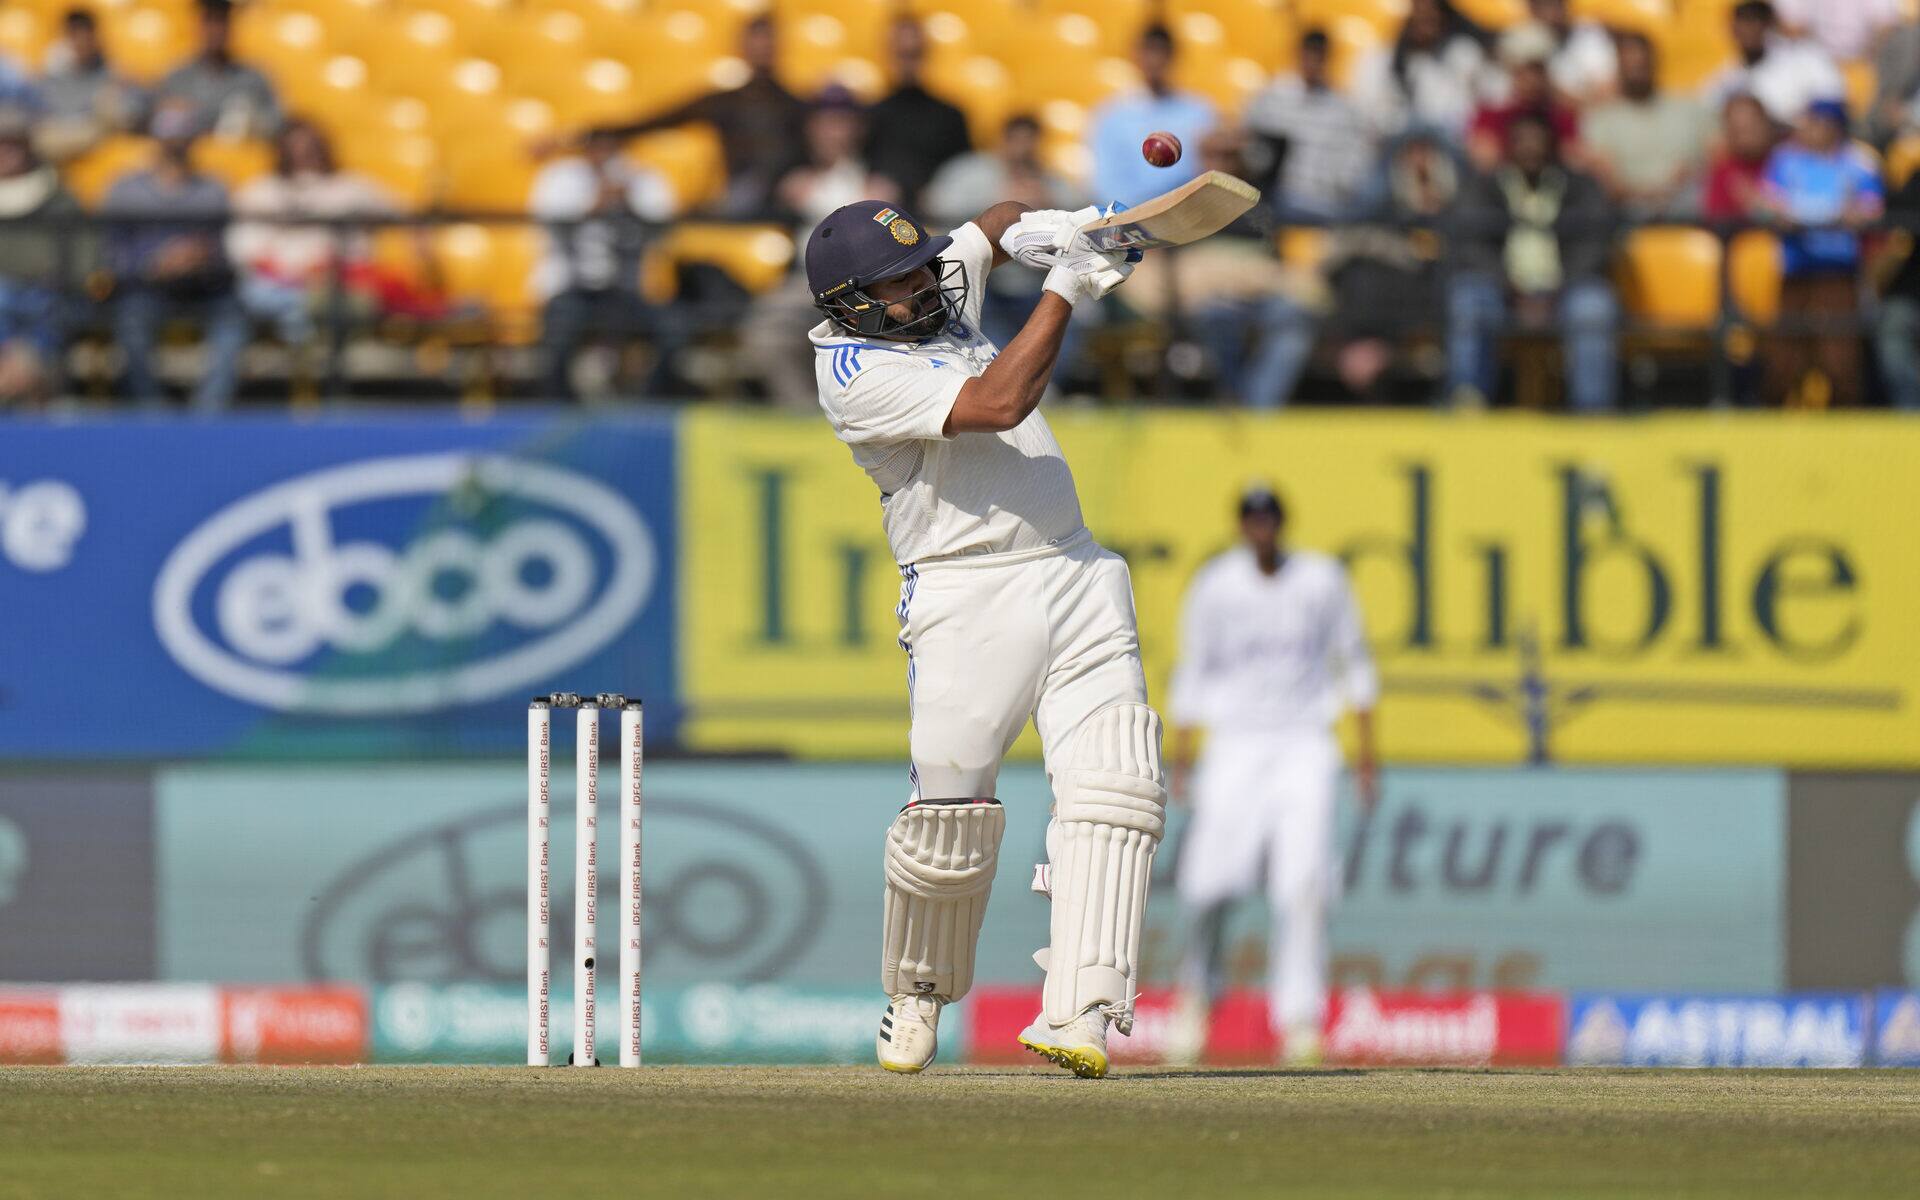 Rohit Sharma goes after Wood (Source: AP Photo)